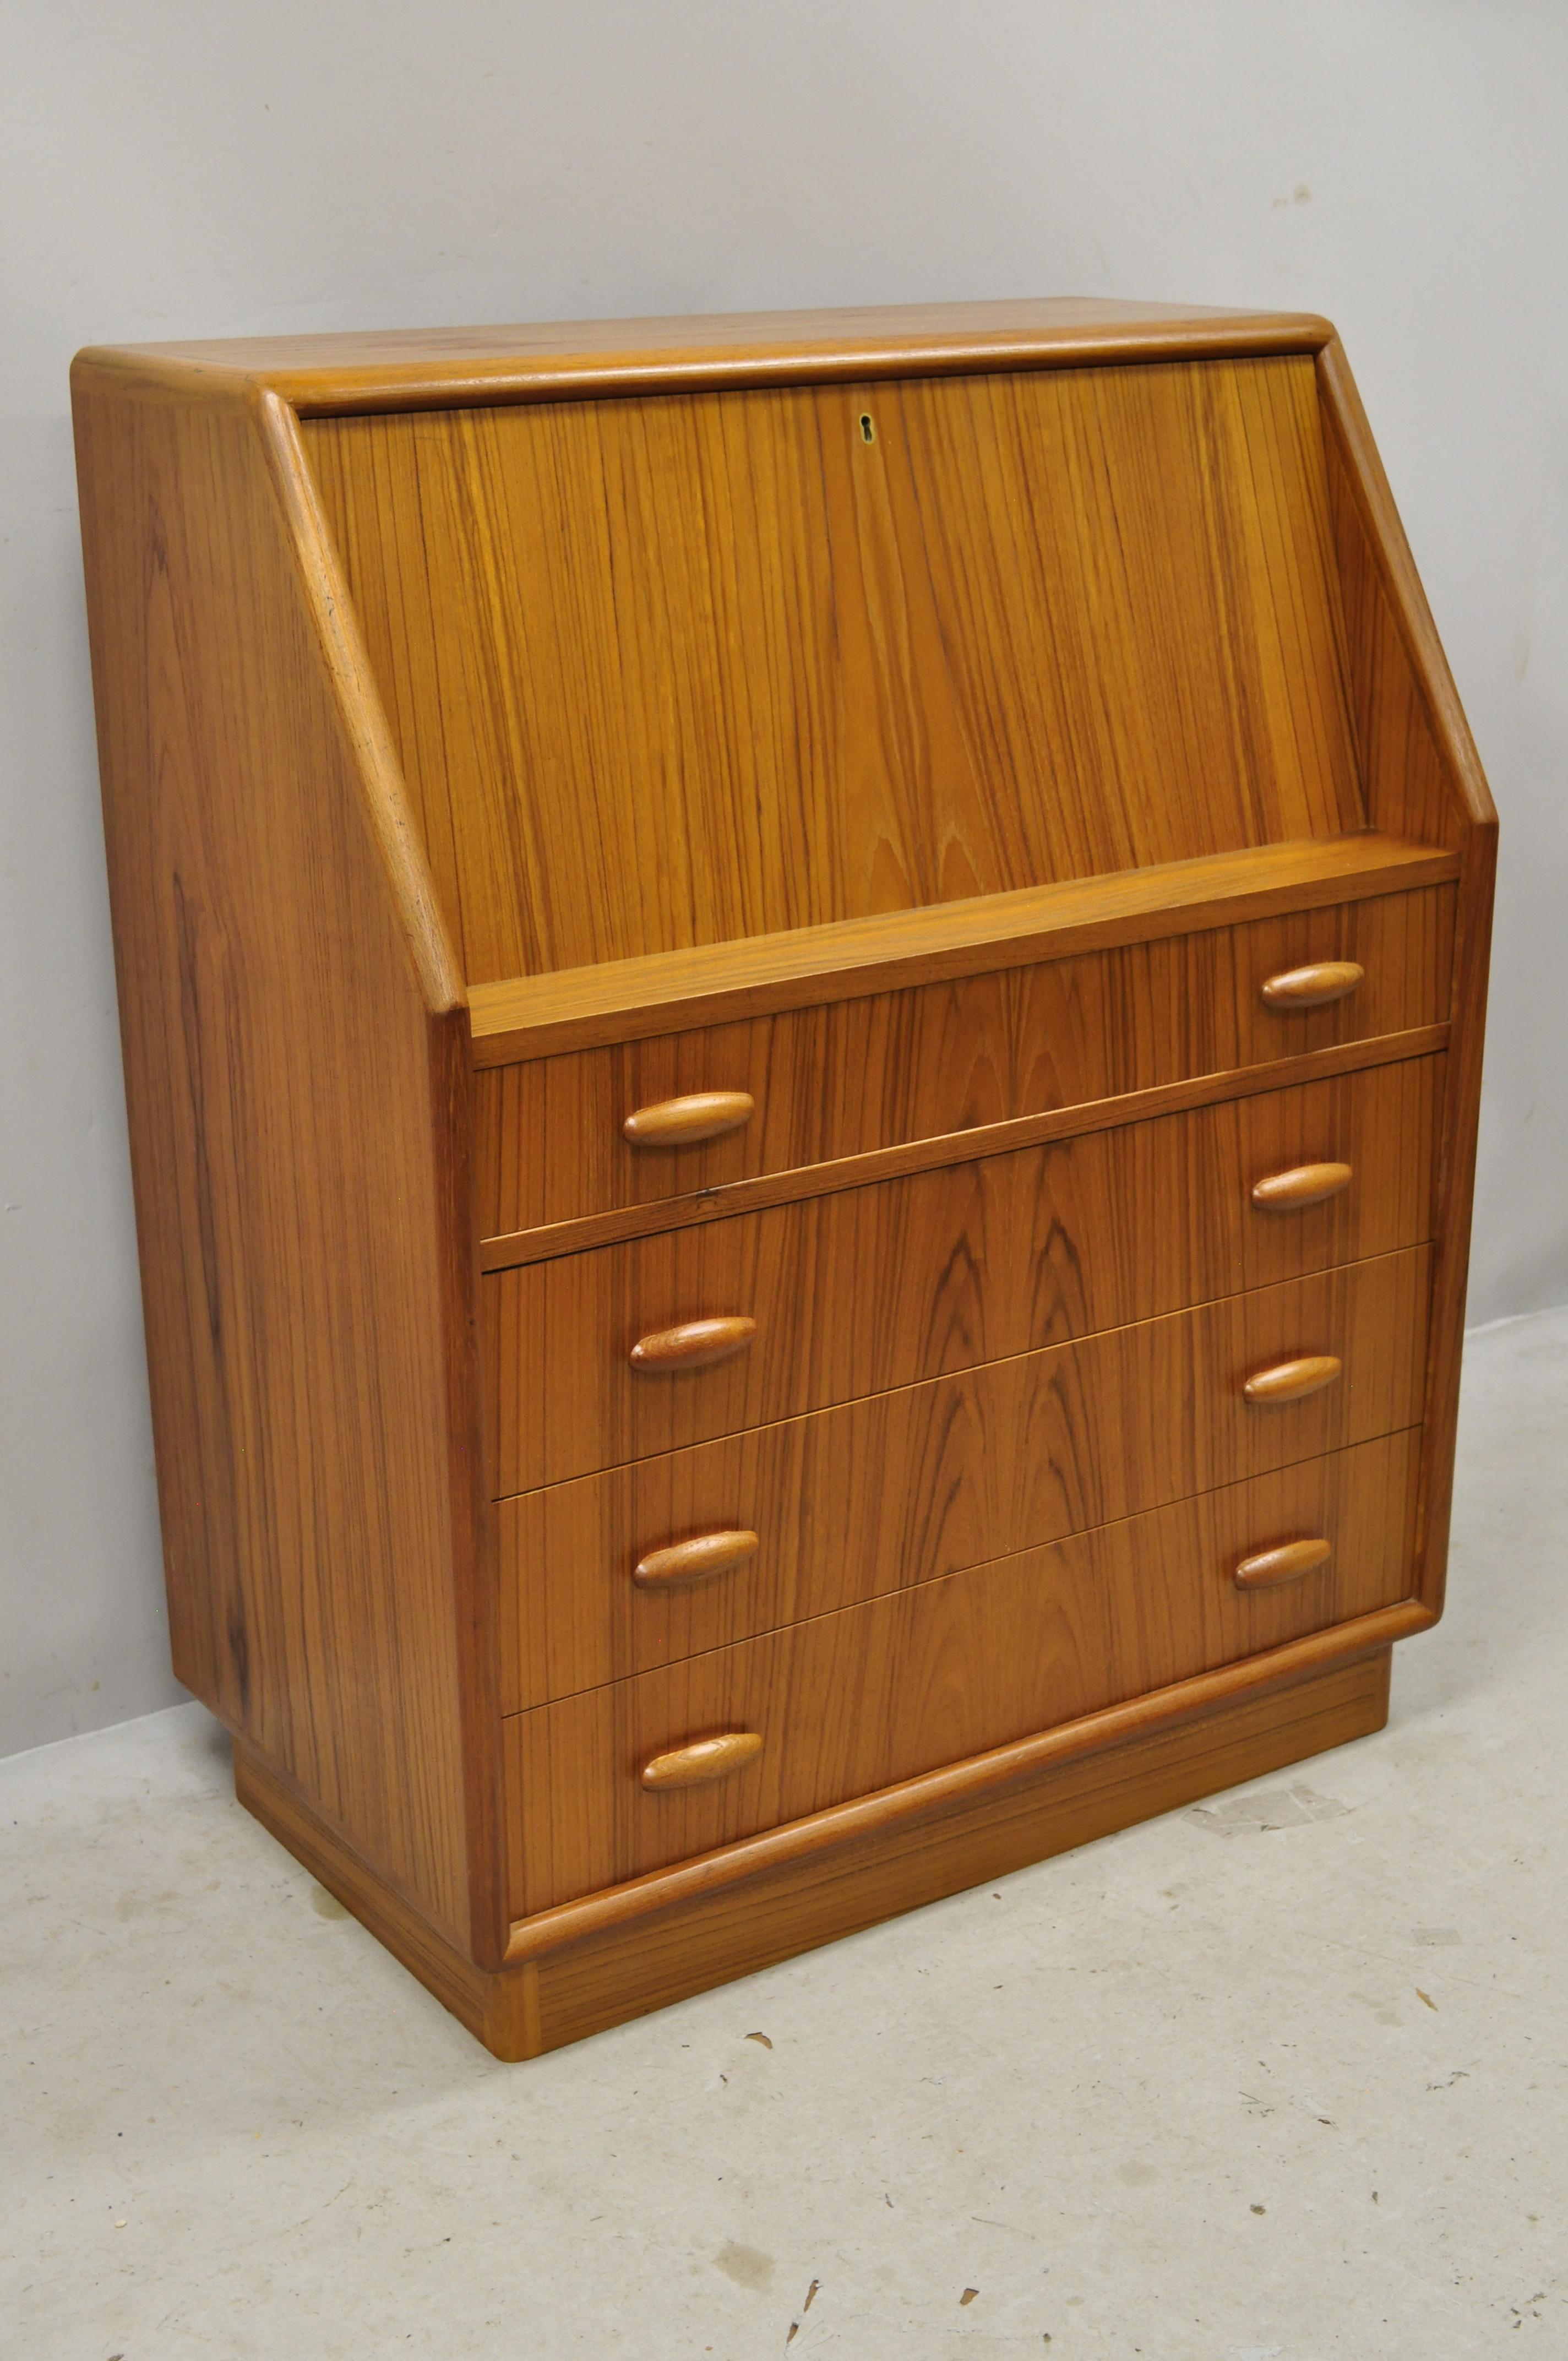 Midcentury Danish modern teak wood slant fall front secretary desk cabinet. Item features fitted interior, fall front, sculpted wood pulls, beautiful wood grain, working lock and key, quality Danish craftsmanship, great style and form, circa 1960s.